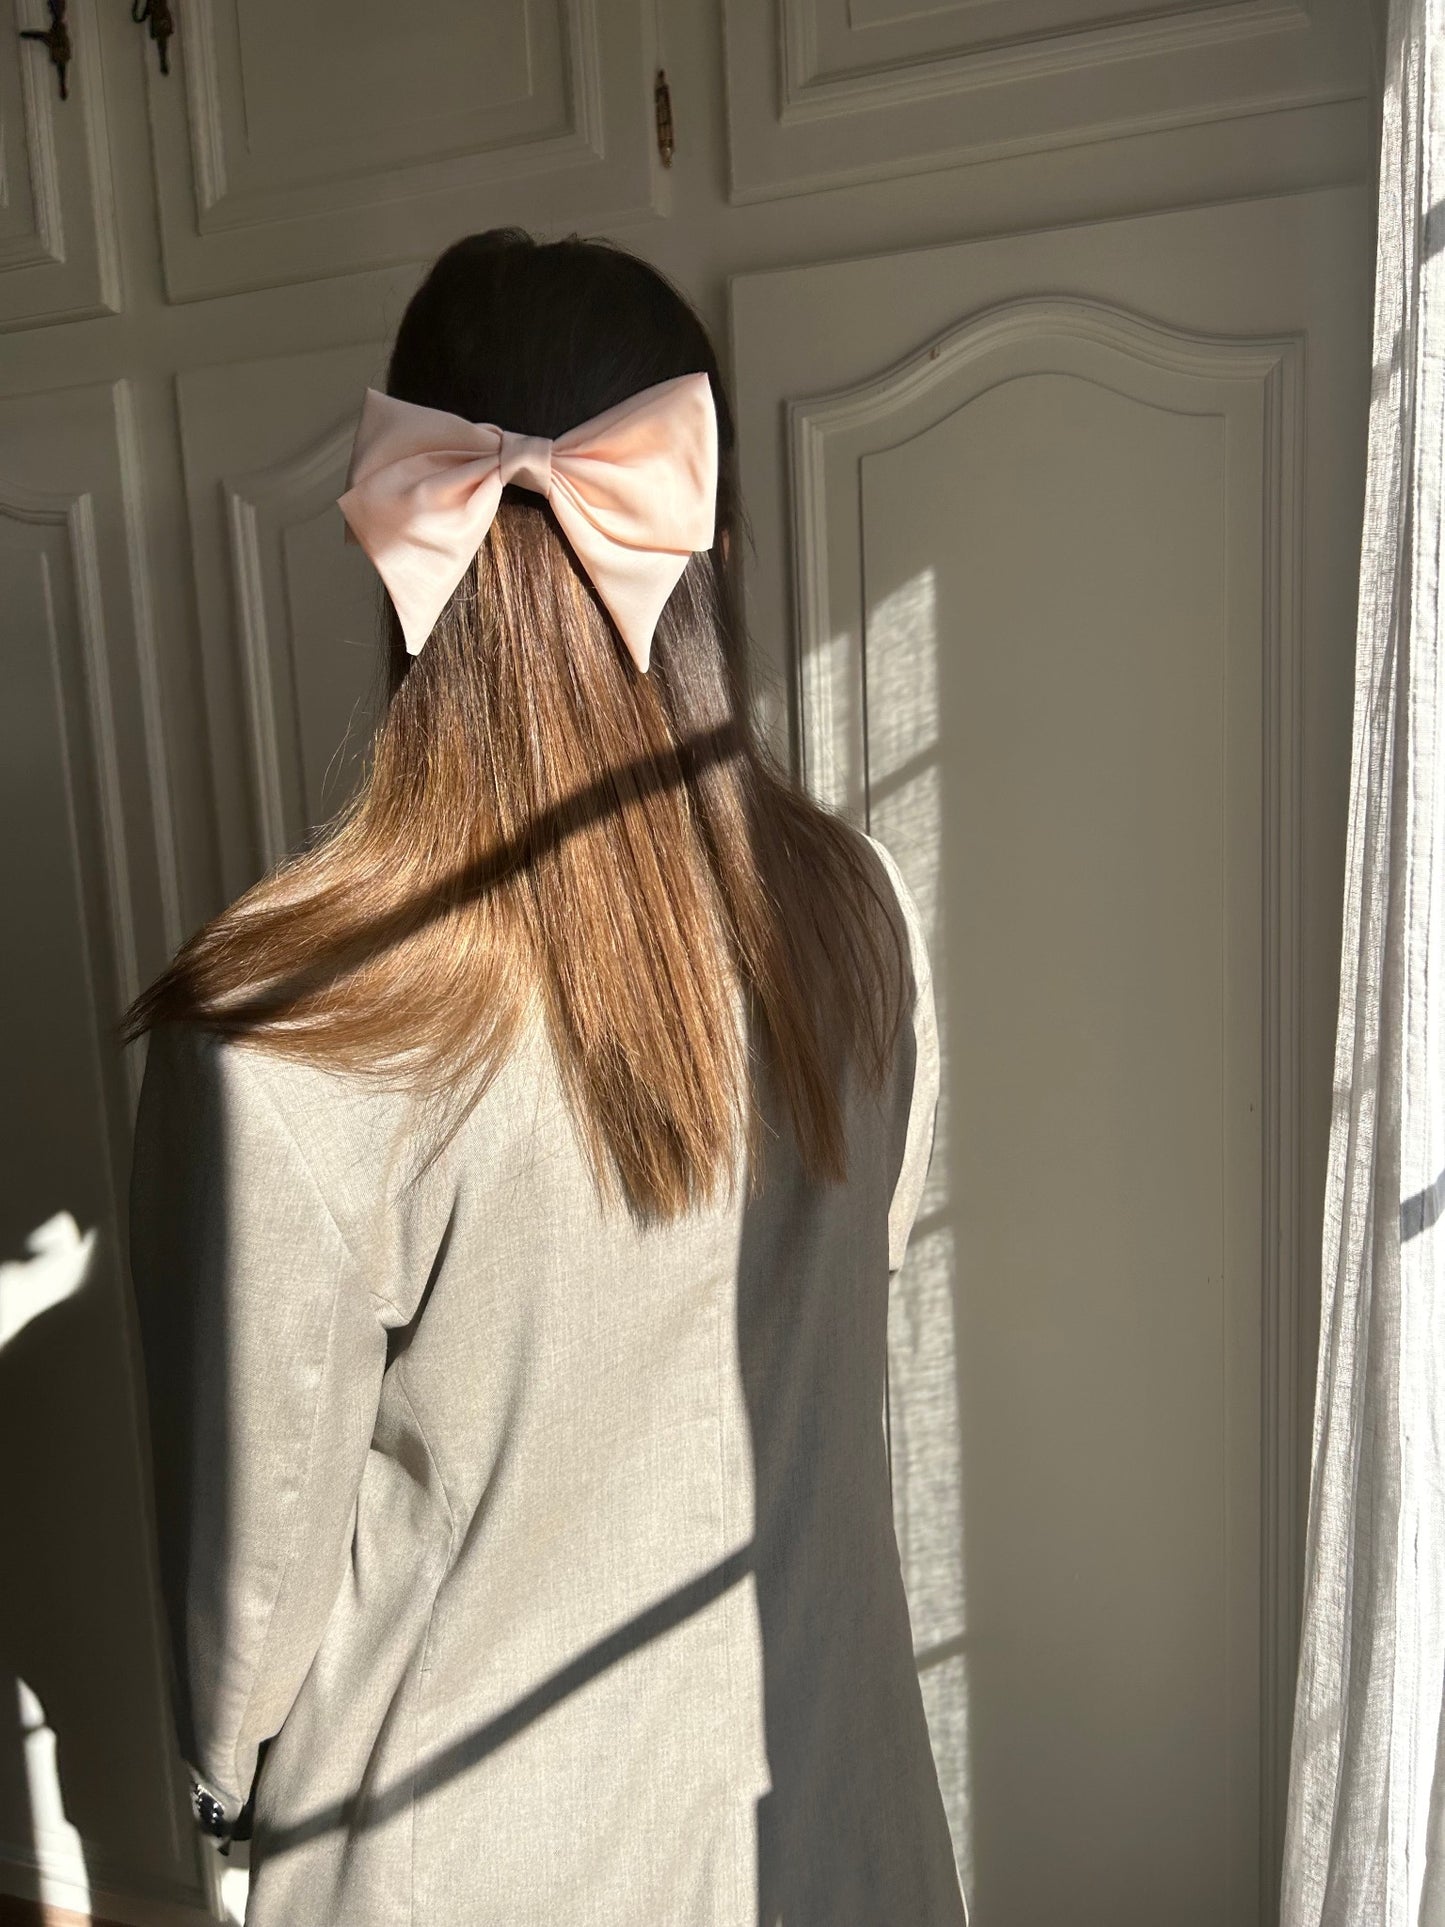 THE PINK BOW